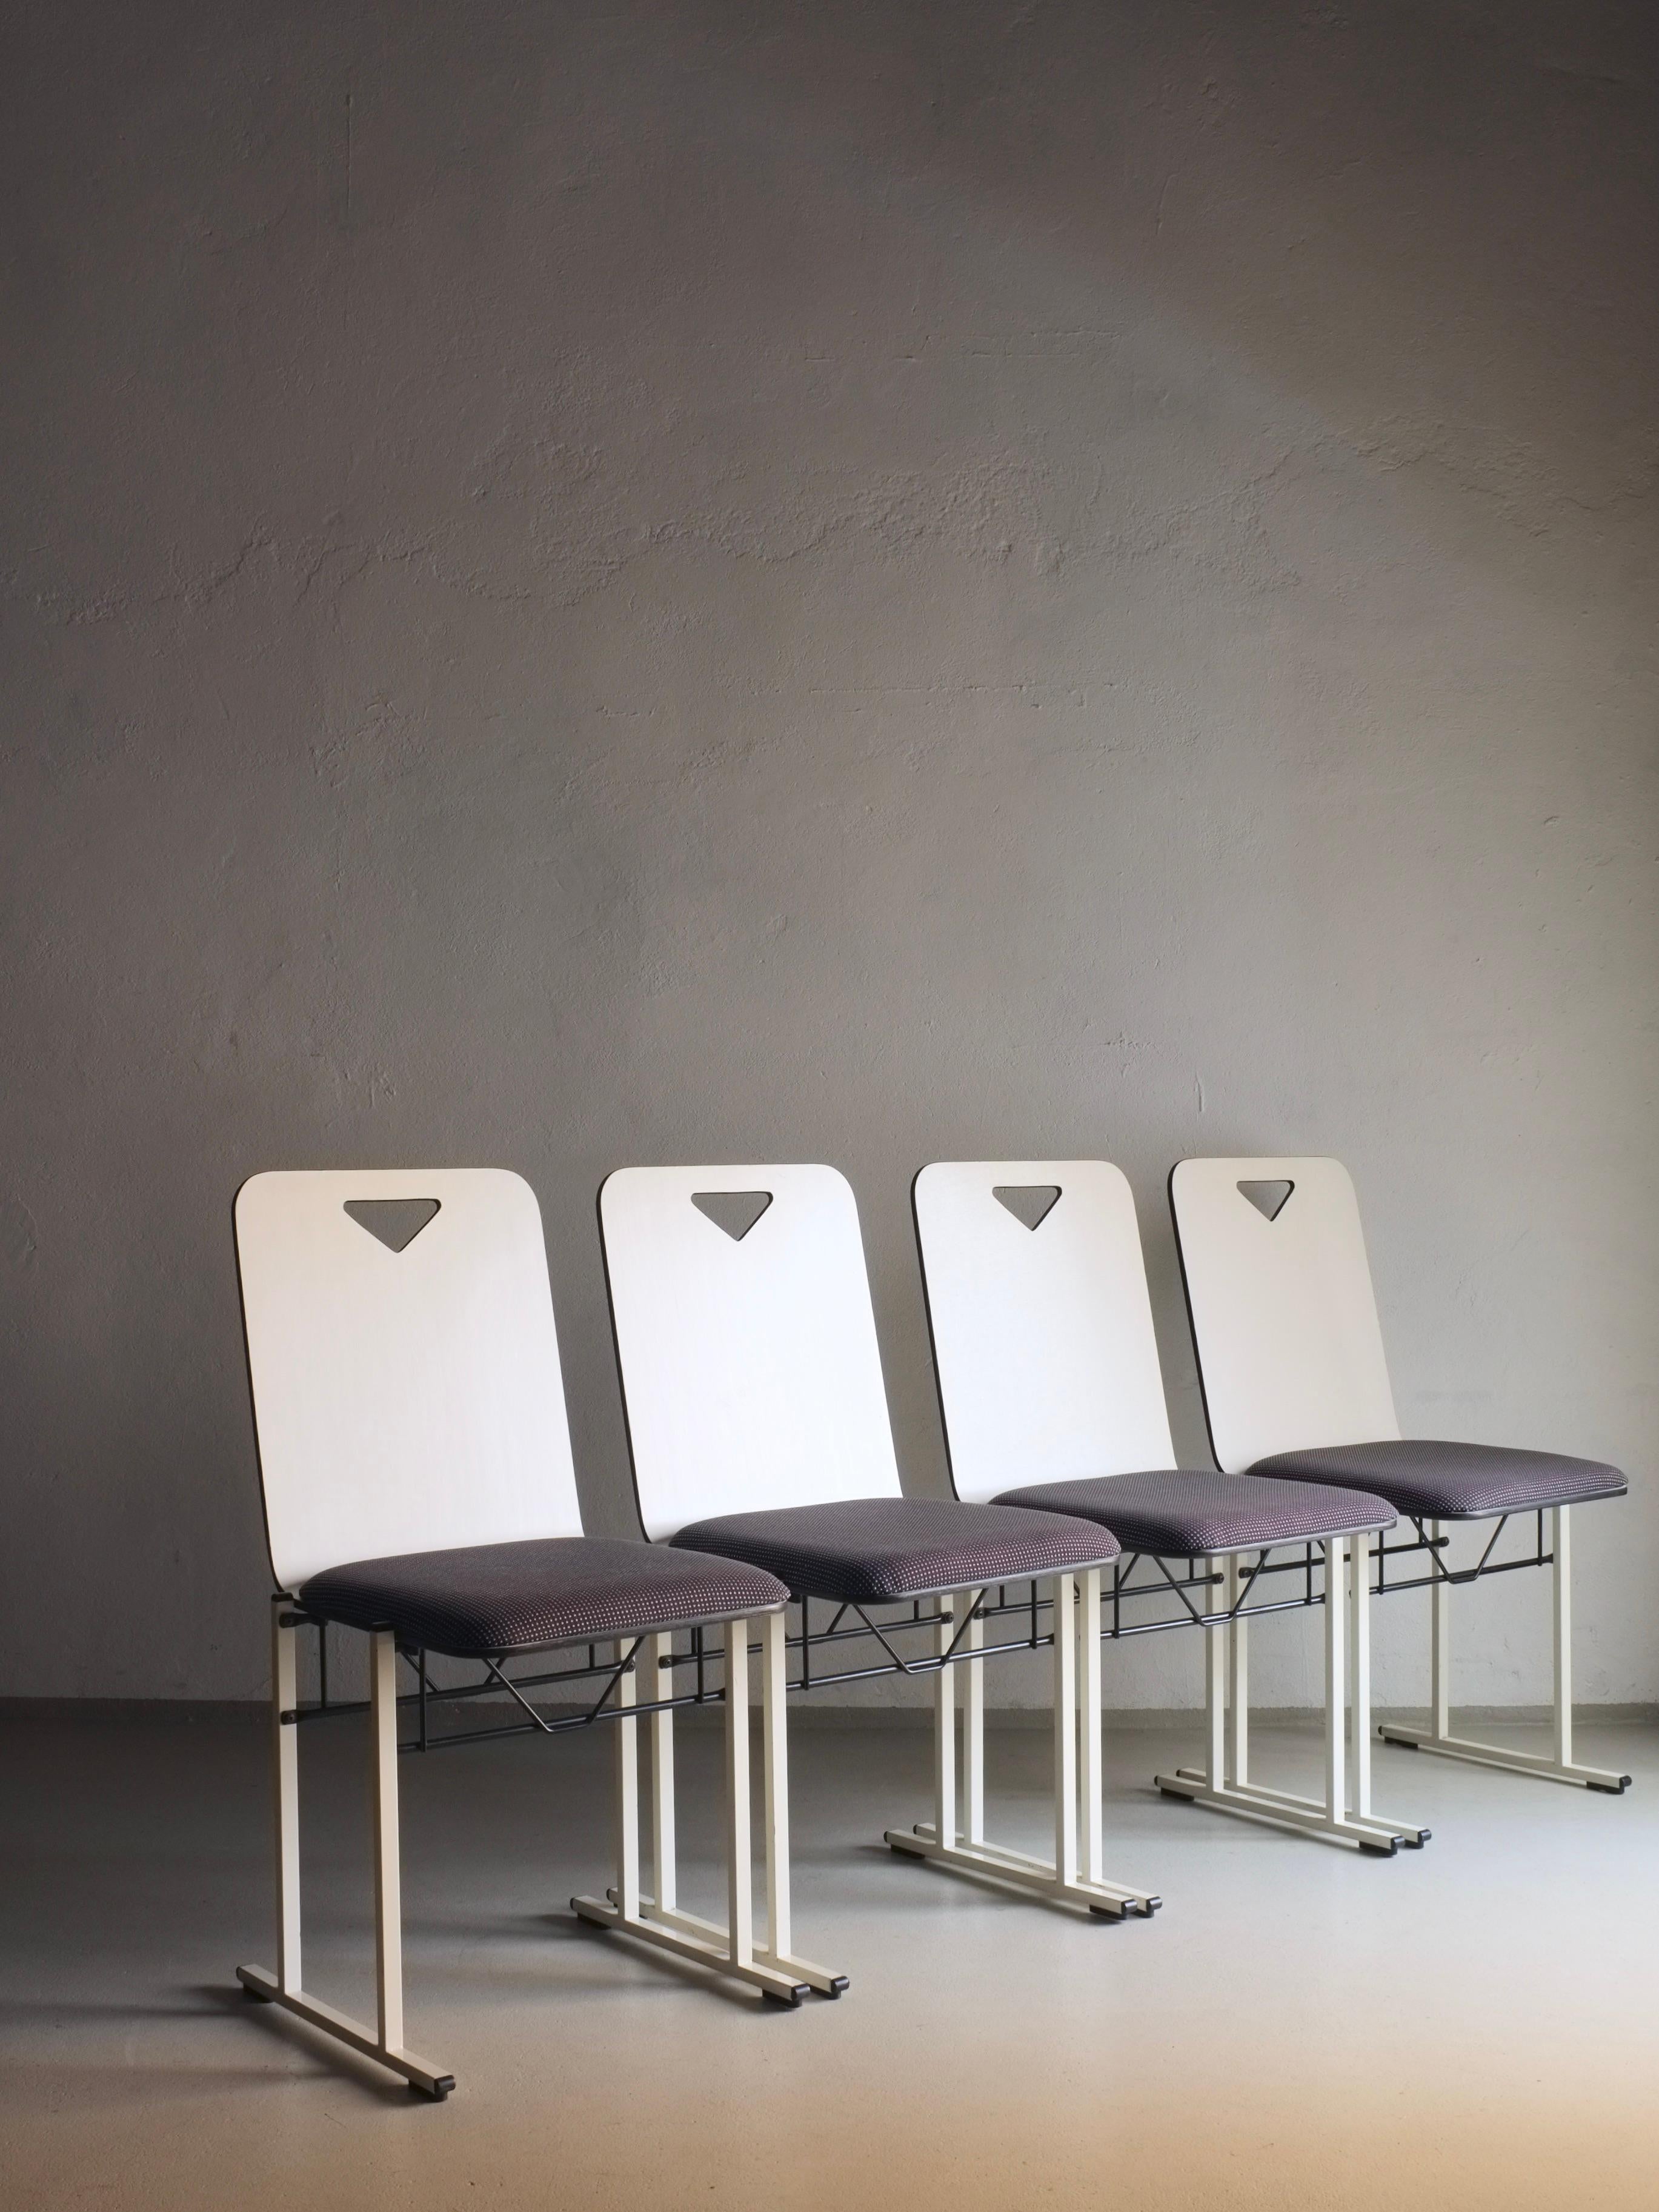 Set of 4 chairs designed by Yrjö Kukkapuro for Avarte, model A500. White laminated birch plywood, white enameled steel frame, original fabric upholstery. I have a set of 2 with some defects.

Additional information:
Country of manufacture: